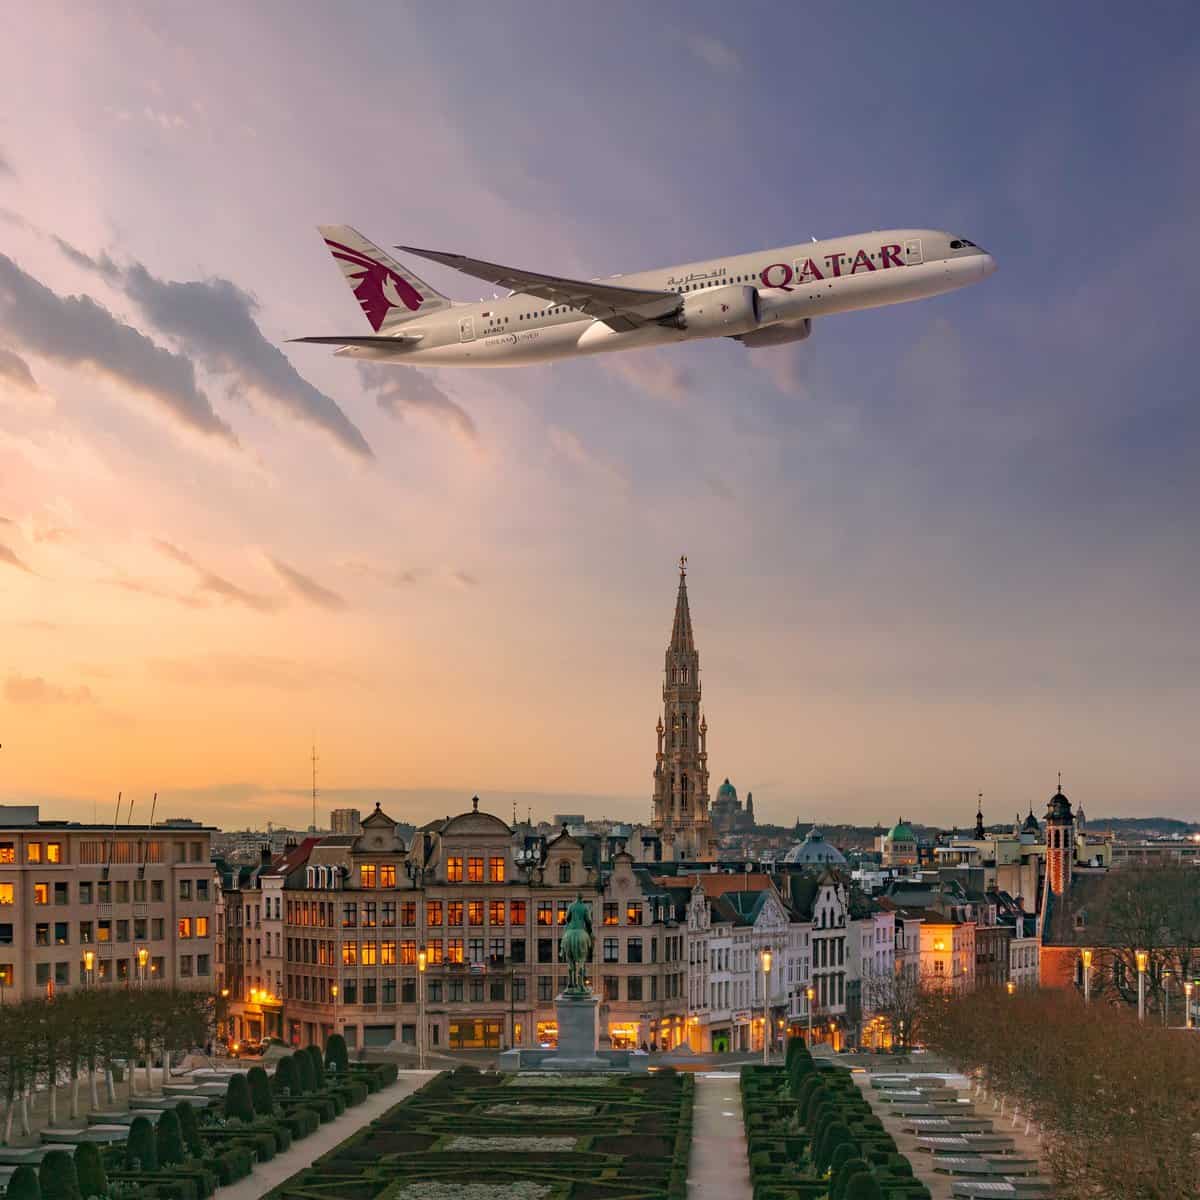 The World's Most Luxurious Airline 2023